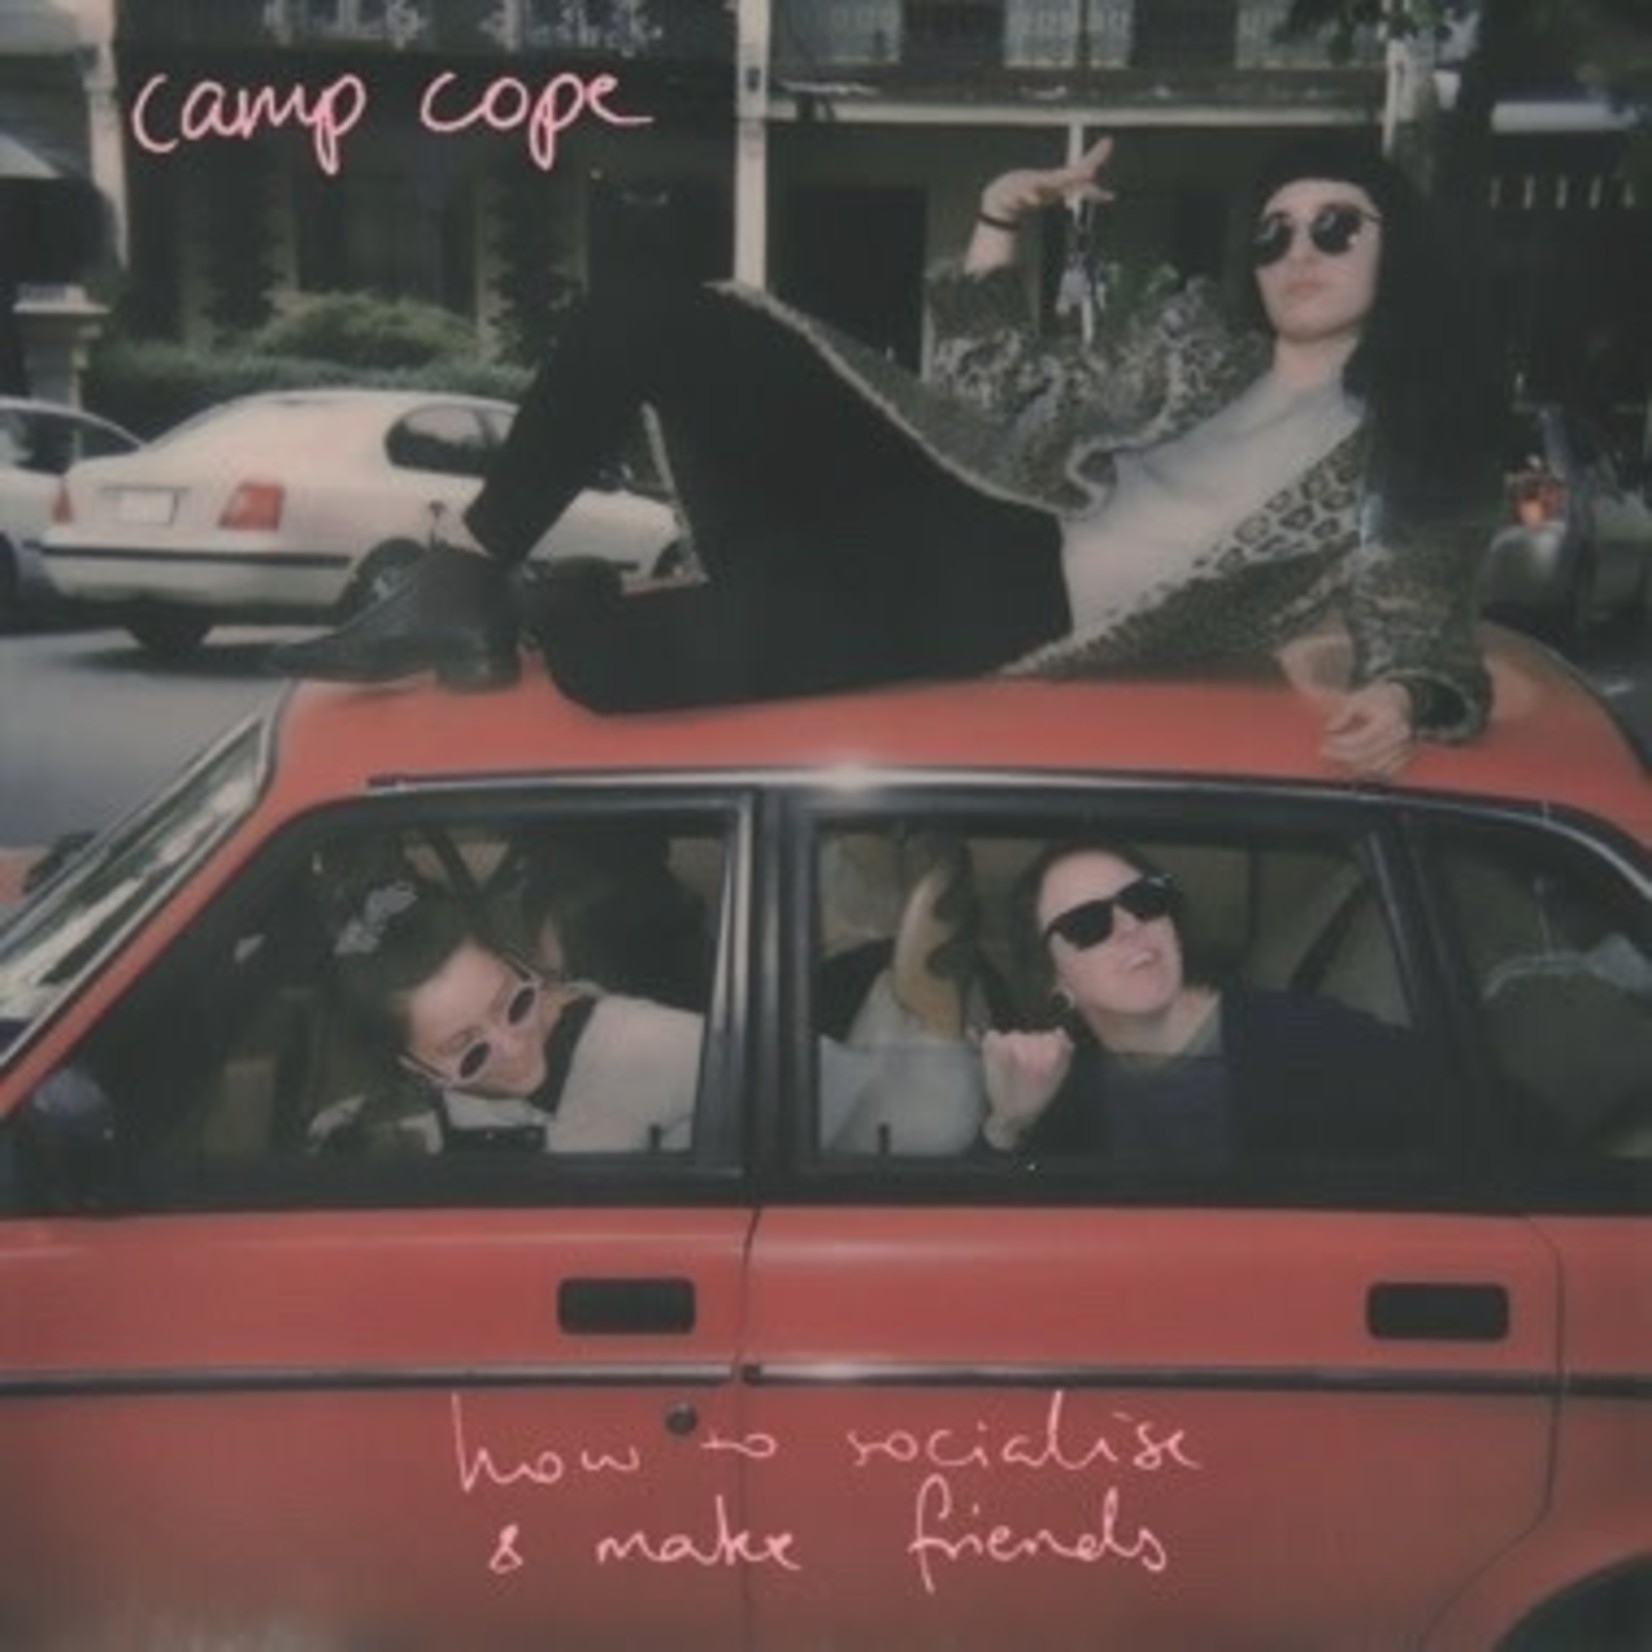 Run For Cover Camp Cope - How to Socialise & Make Friends (LP) [Pink/Black Swirl]